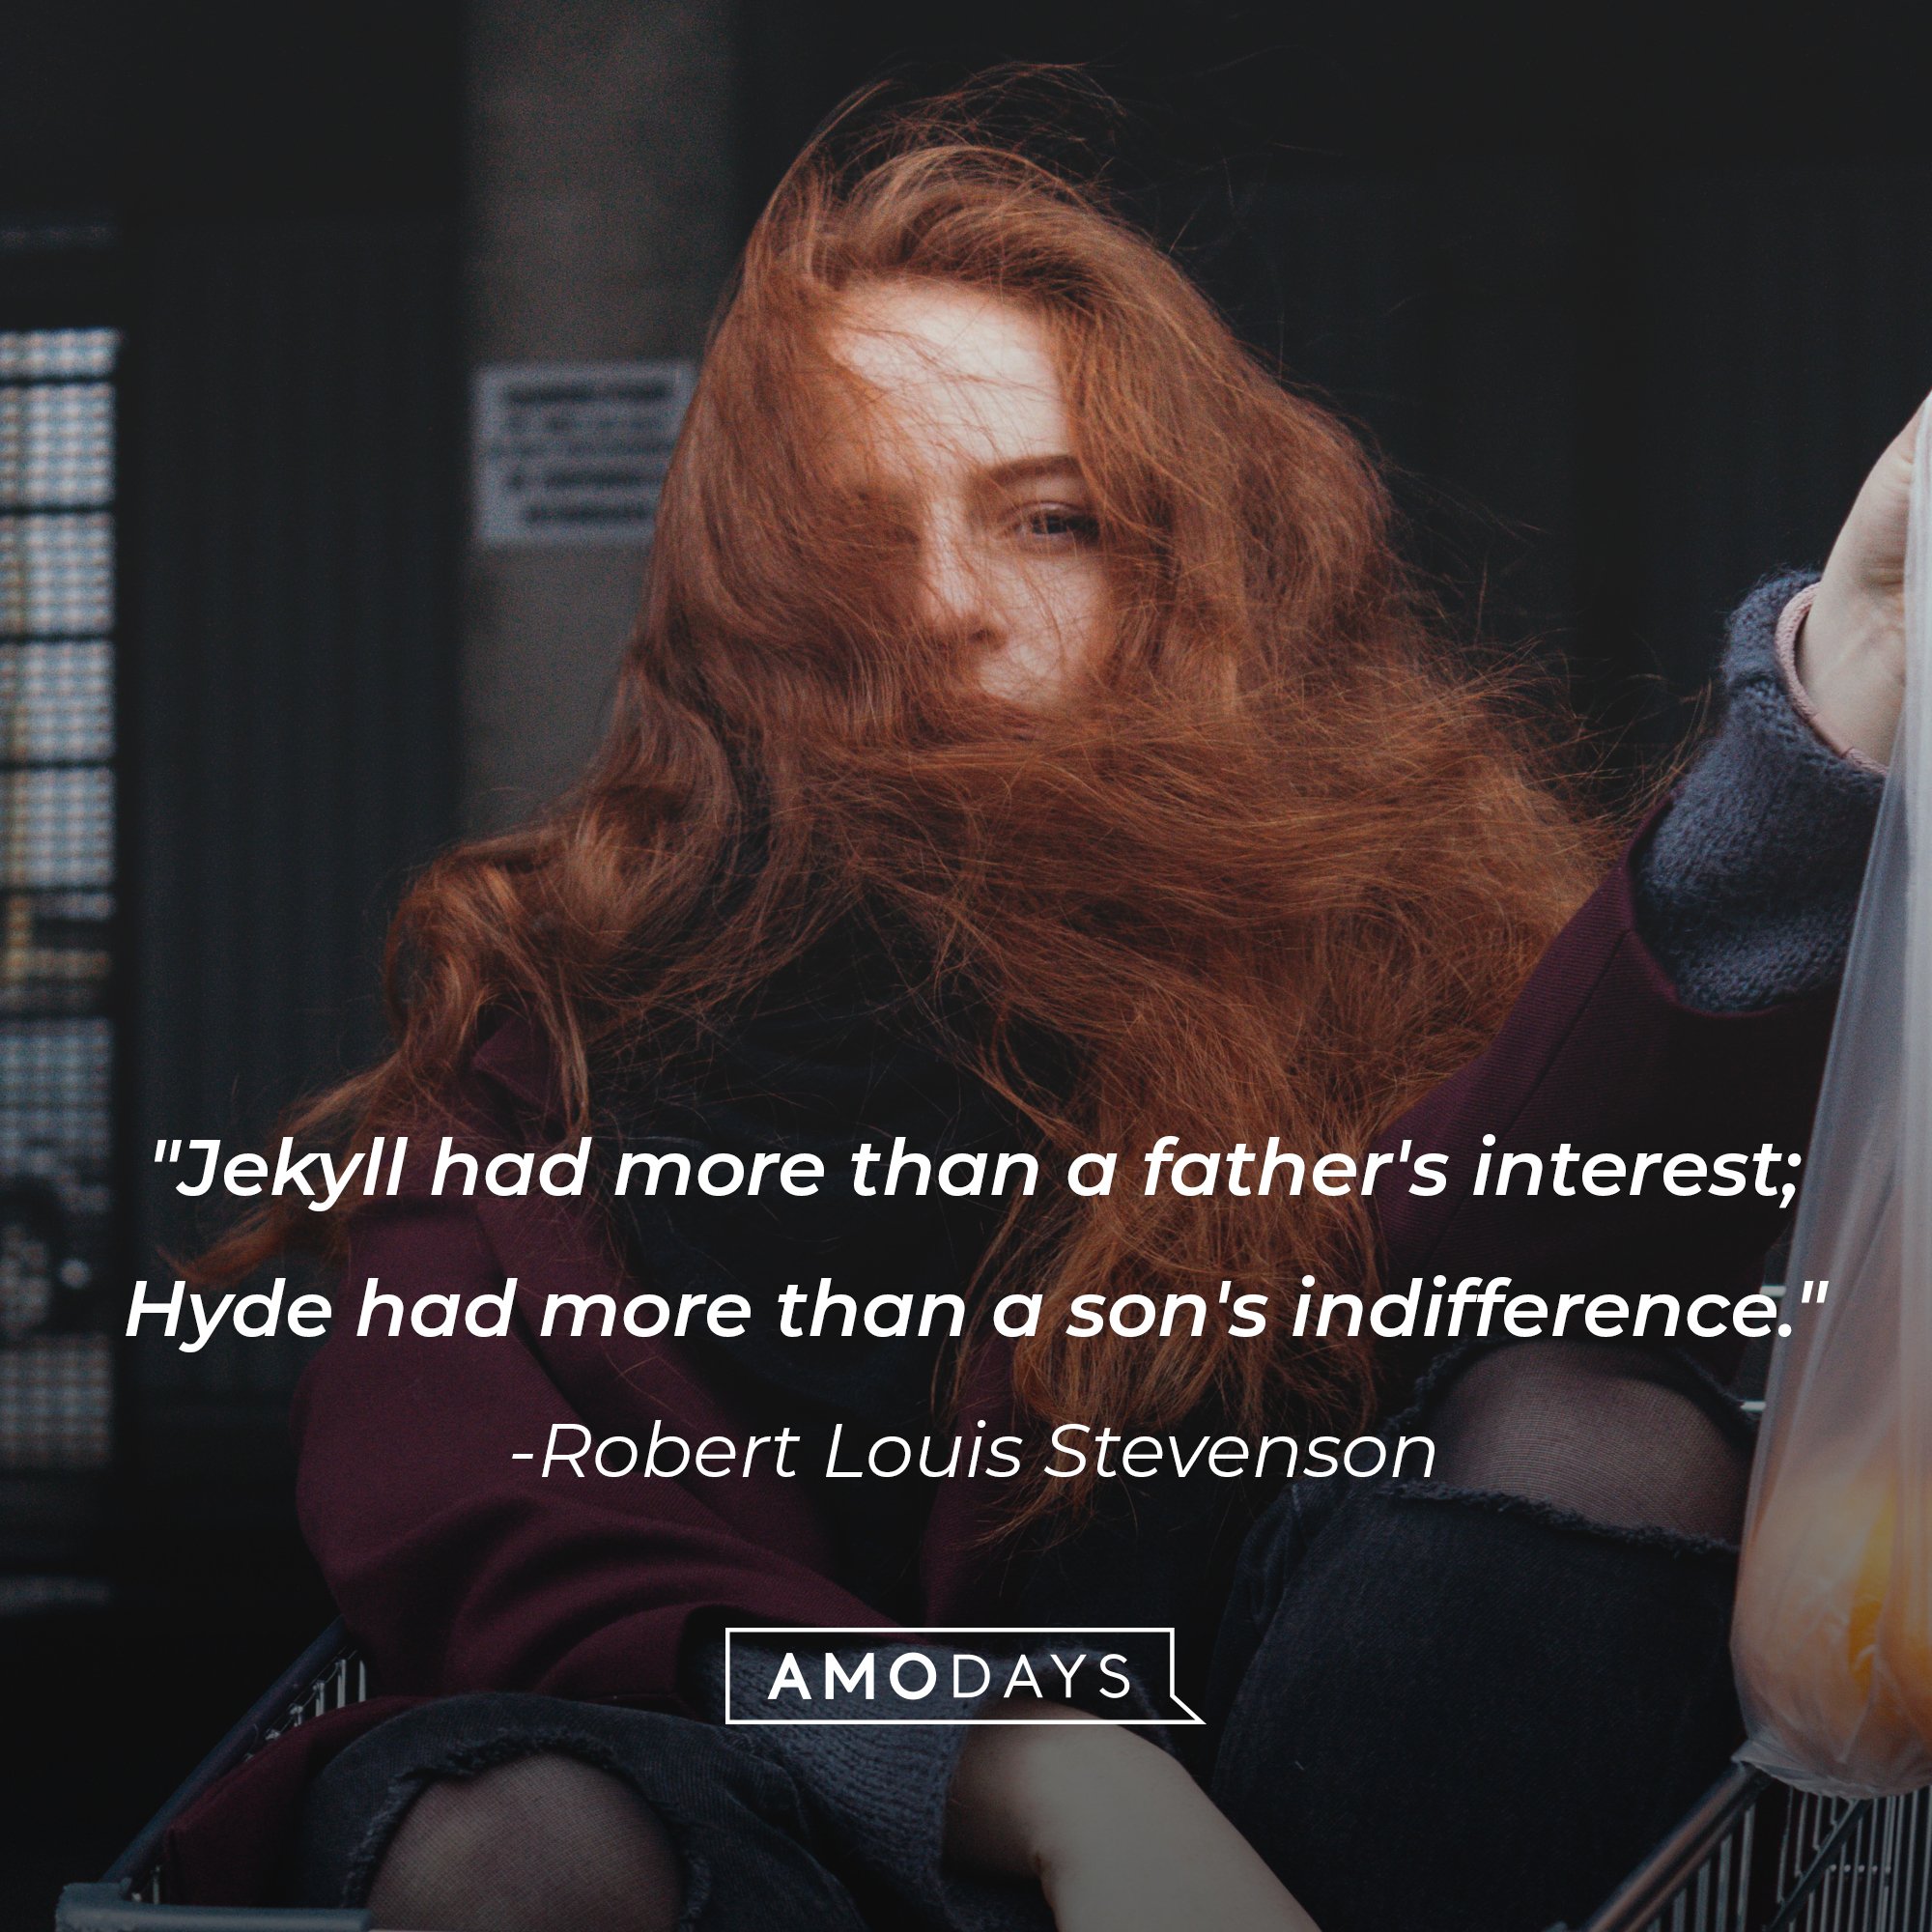 Robert Louis Stevenson's quote: "Jekyll had more than a father's interest; Hyde had more than a son's indifference." | Image: AmoDays